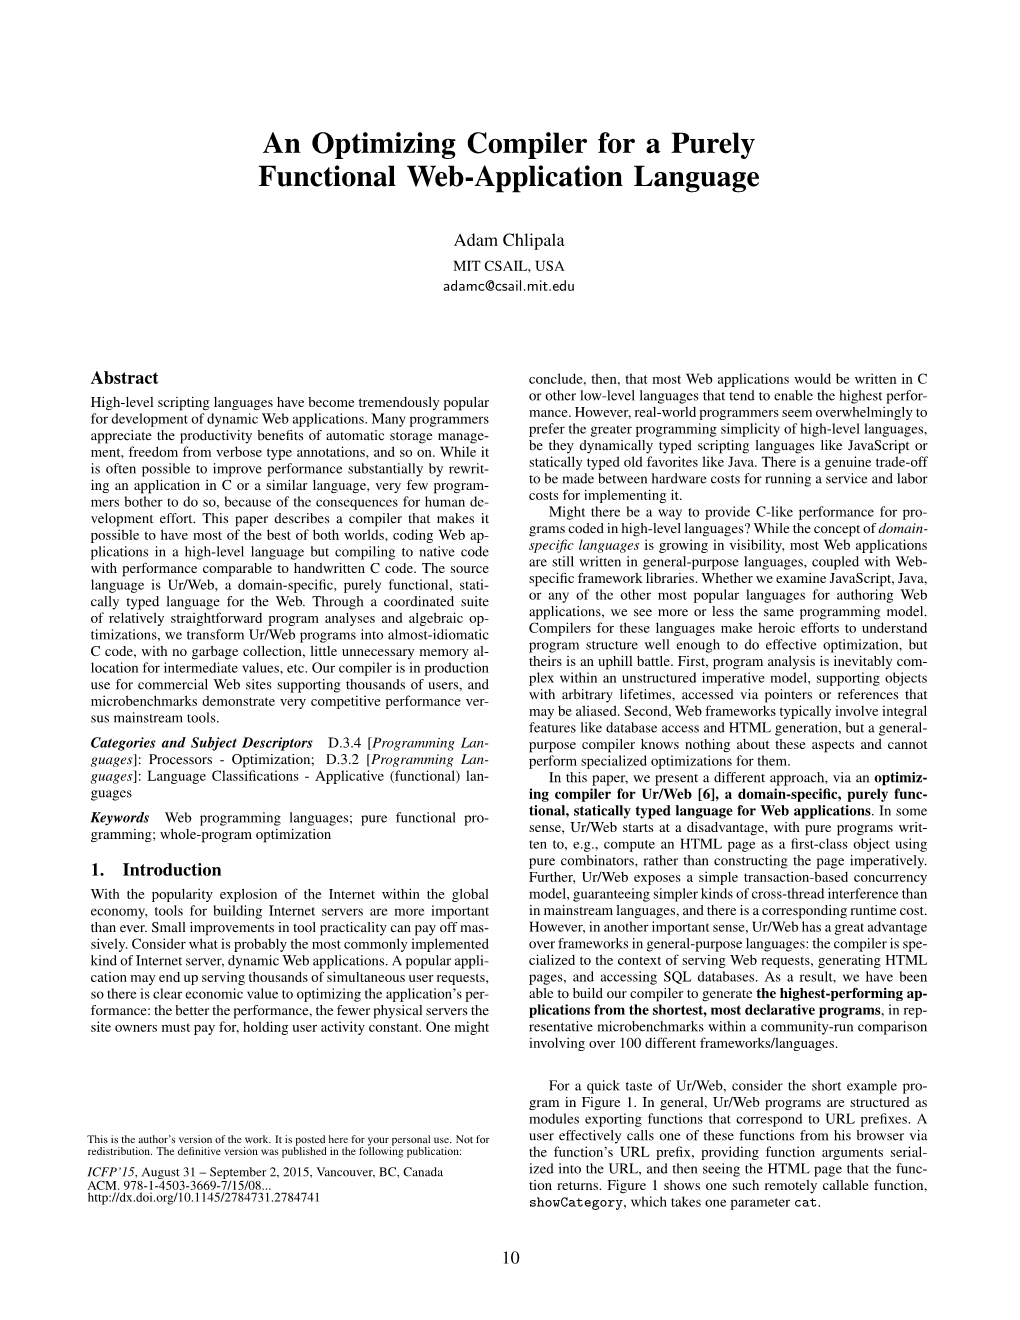 An Optimizing Compiler for a Purely Functional Web-Application Language